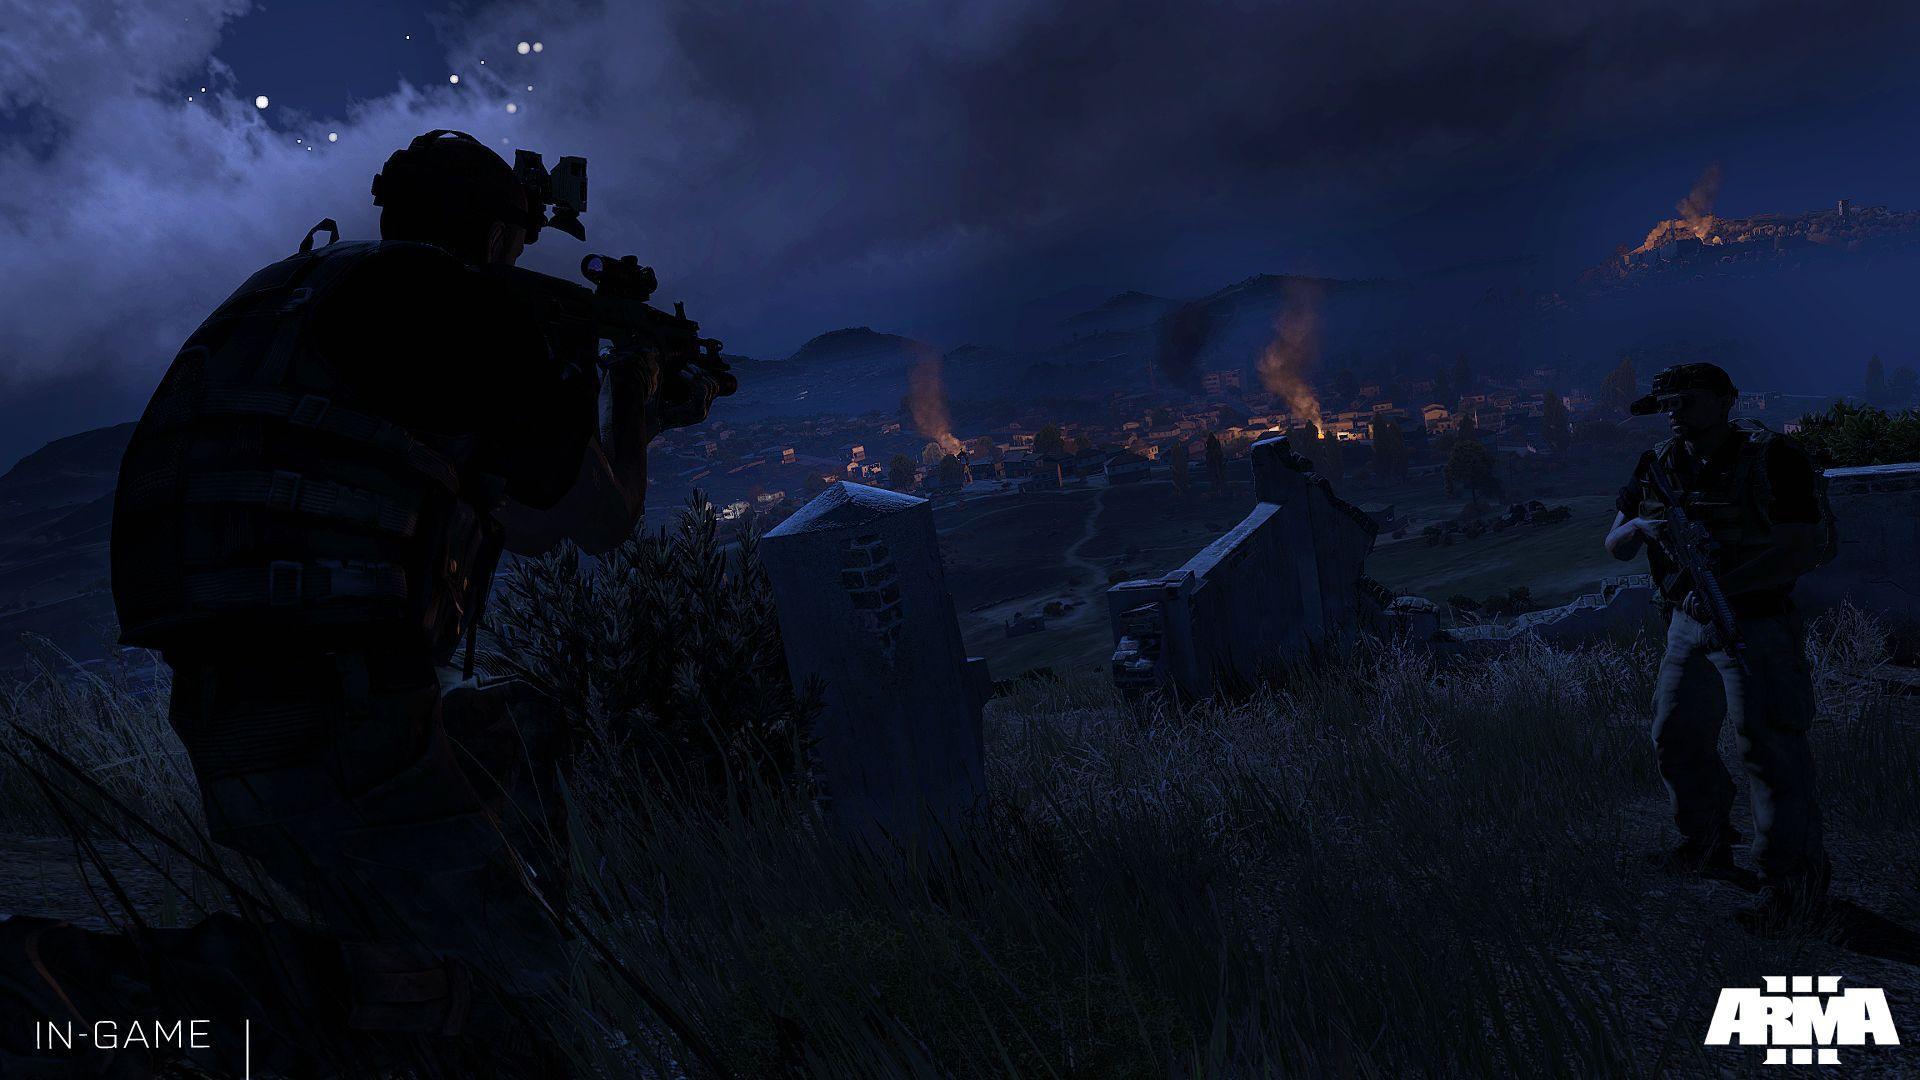 ARMA 3'S SECOND CAMPAIGN EPISODE 'ADAPT' NOW AVAILABLE